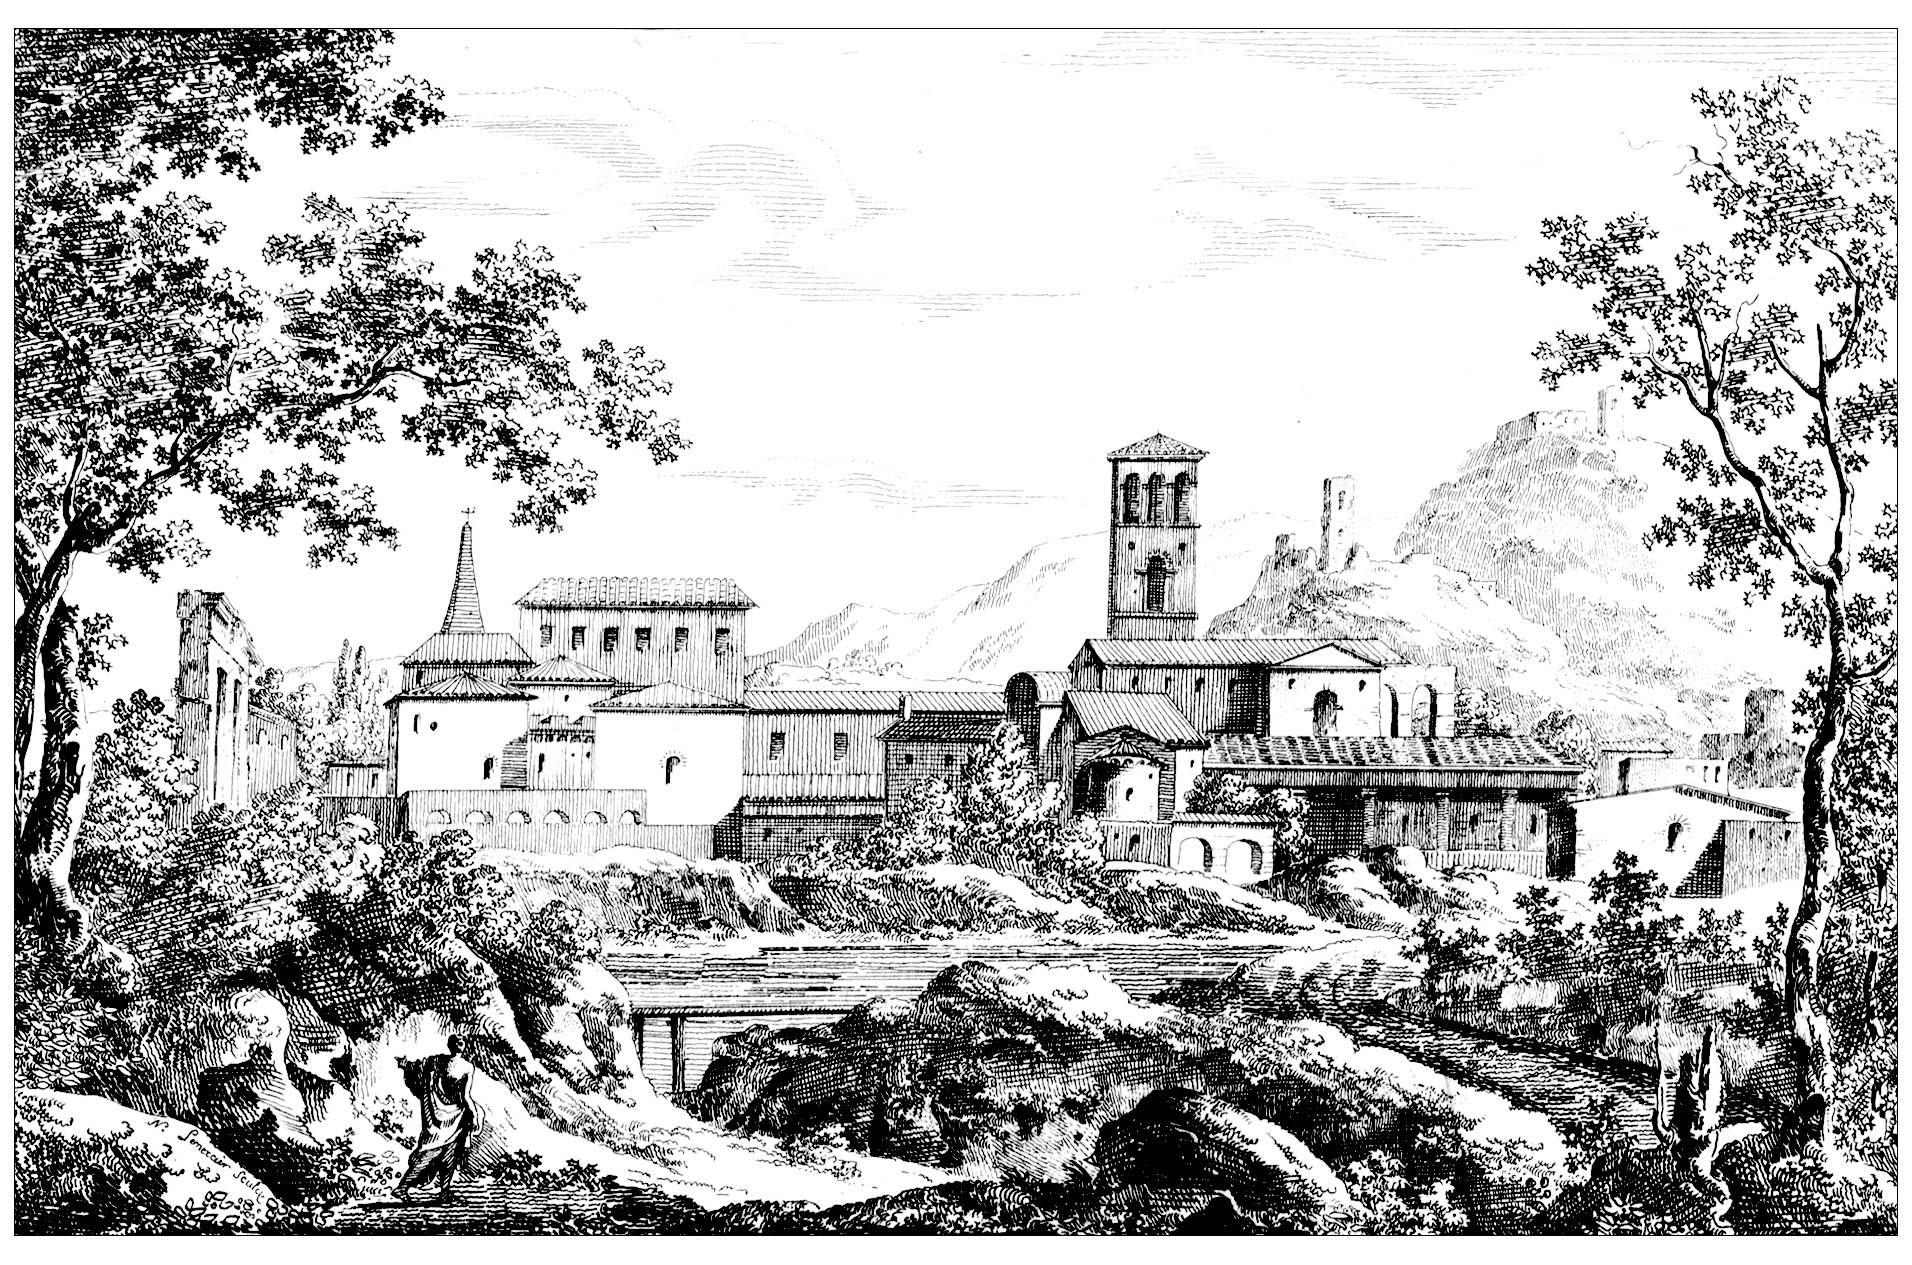 Landscape with basilica, by Gaspard Dughet (also known as Gaspard Poussin) (1615 - 1675)